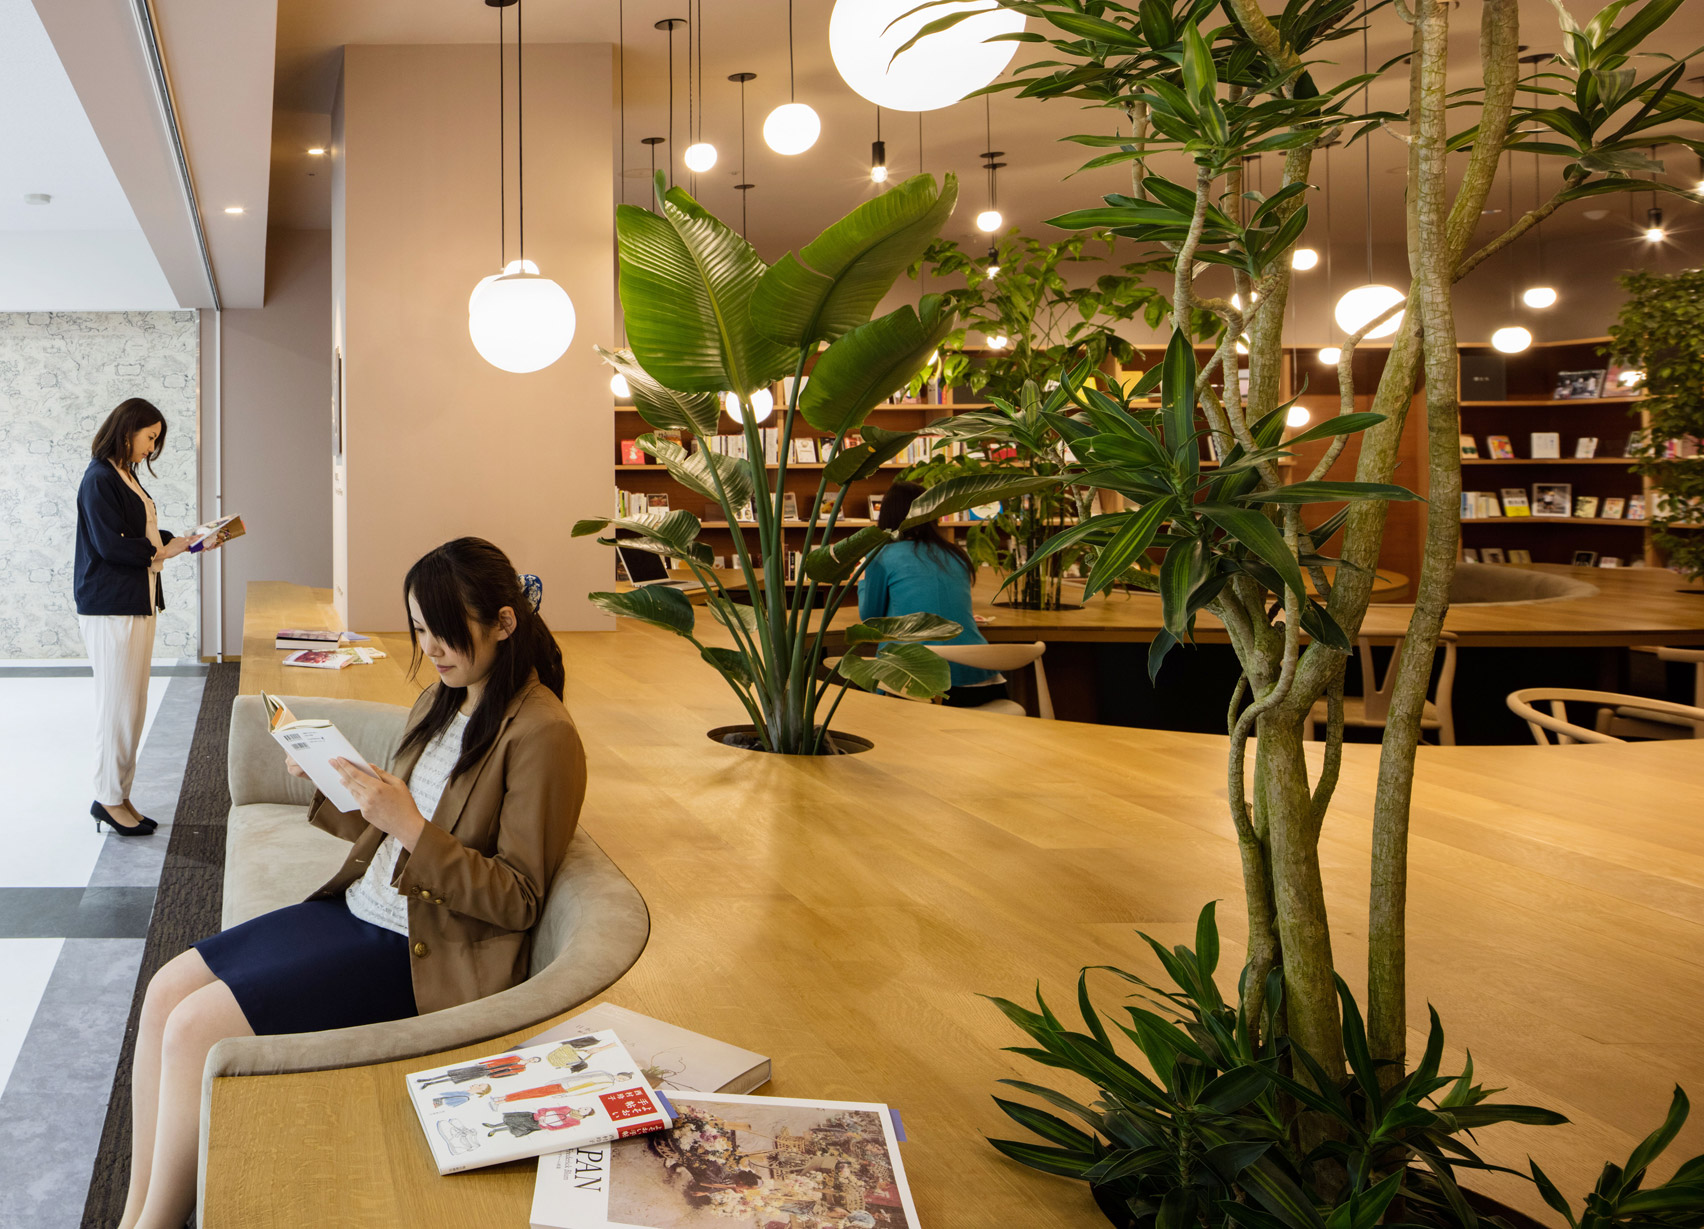 wil-womans-inspiration-library-japan-masa-architects-interiors_dezeen_1704_col_5